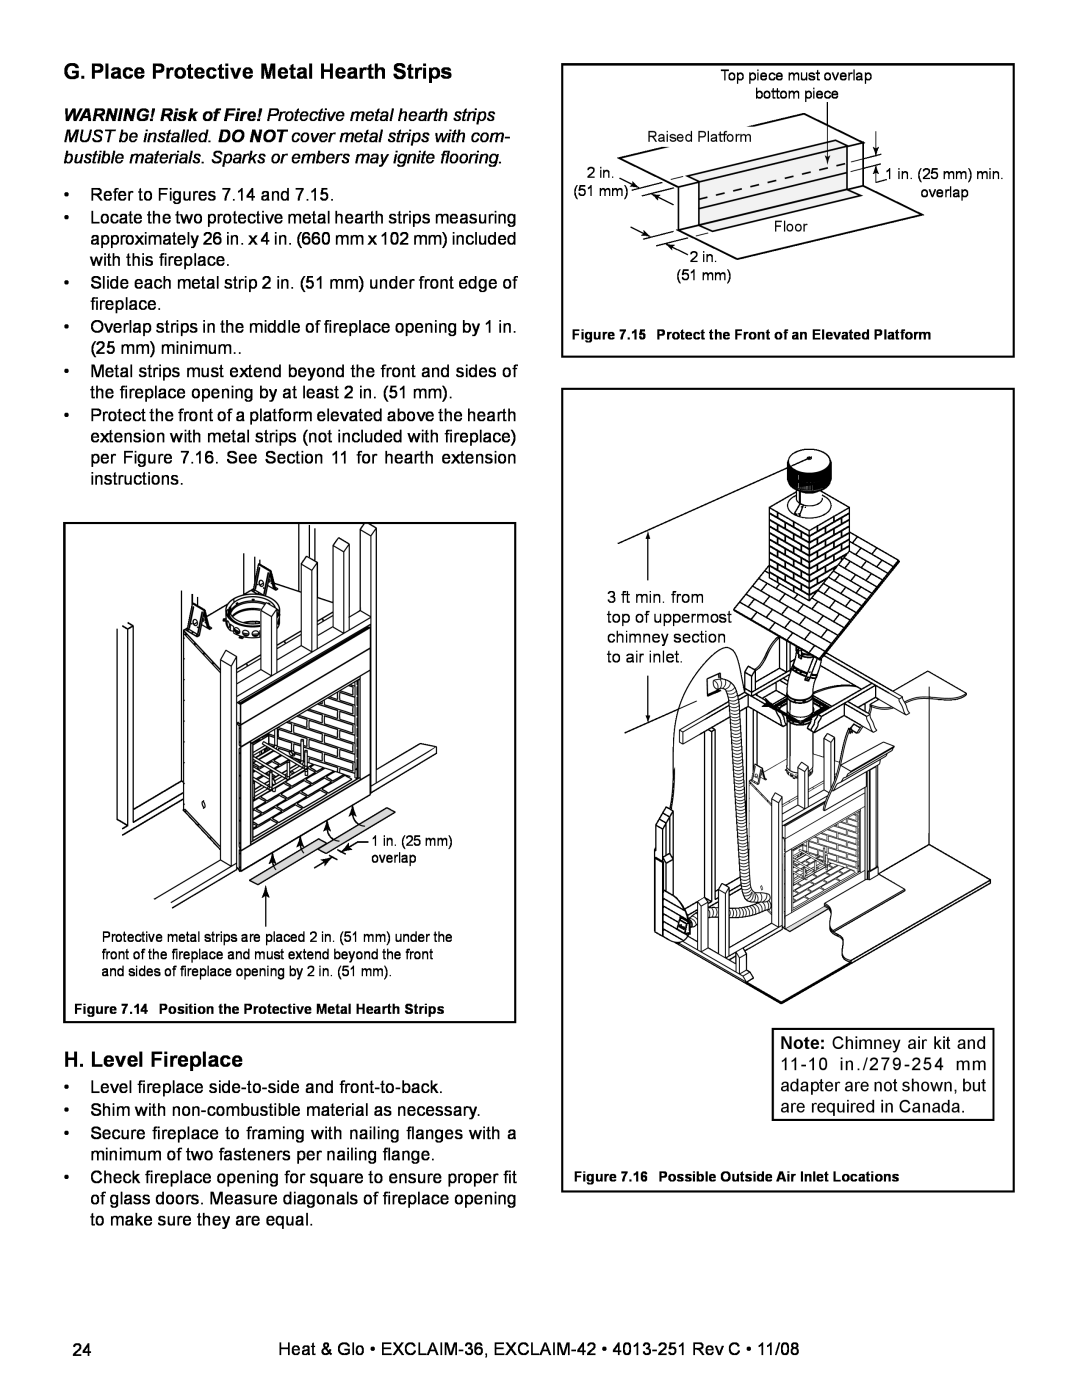 Hearth and Home Technologies EXCLAIM-36 owner manual G. Place Protective Metal Hearth Strips, H. Level Fireplace 